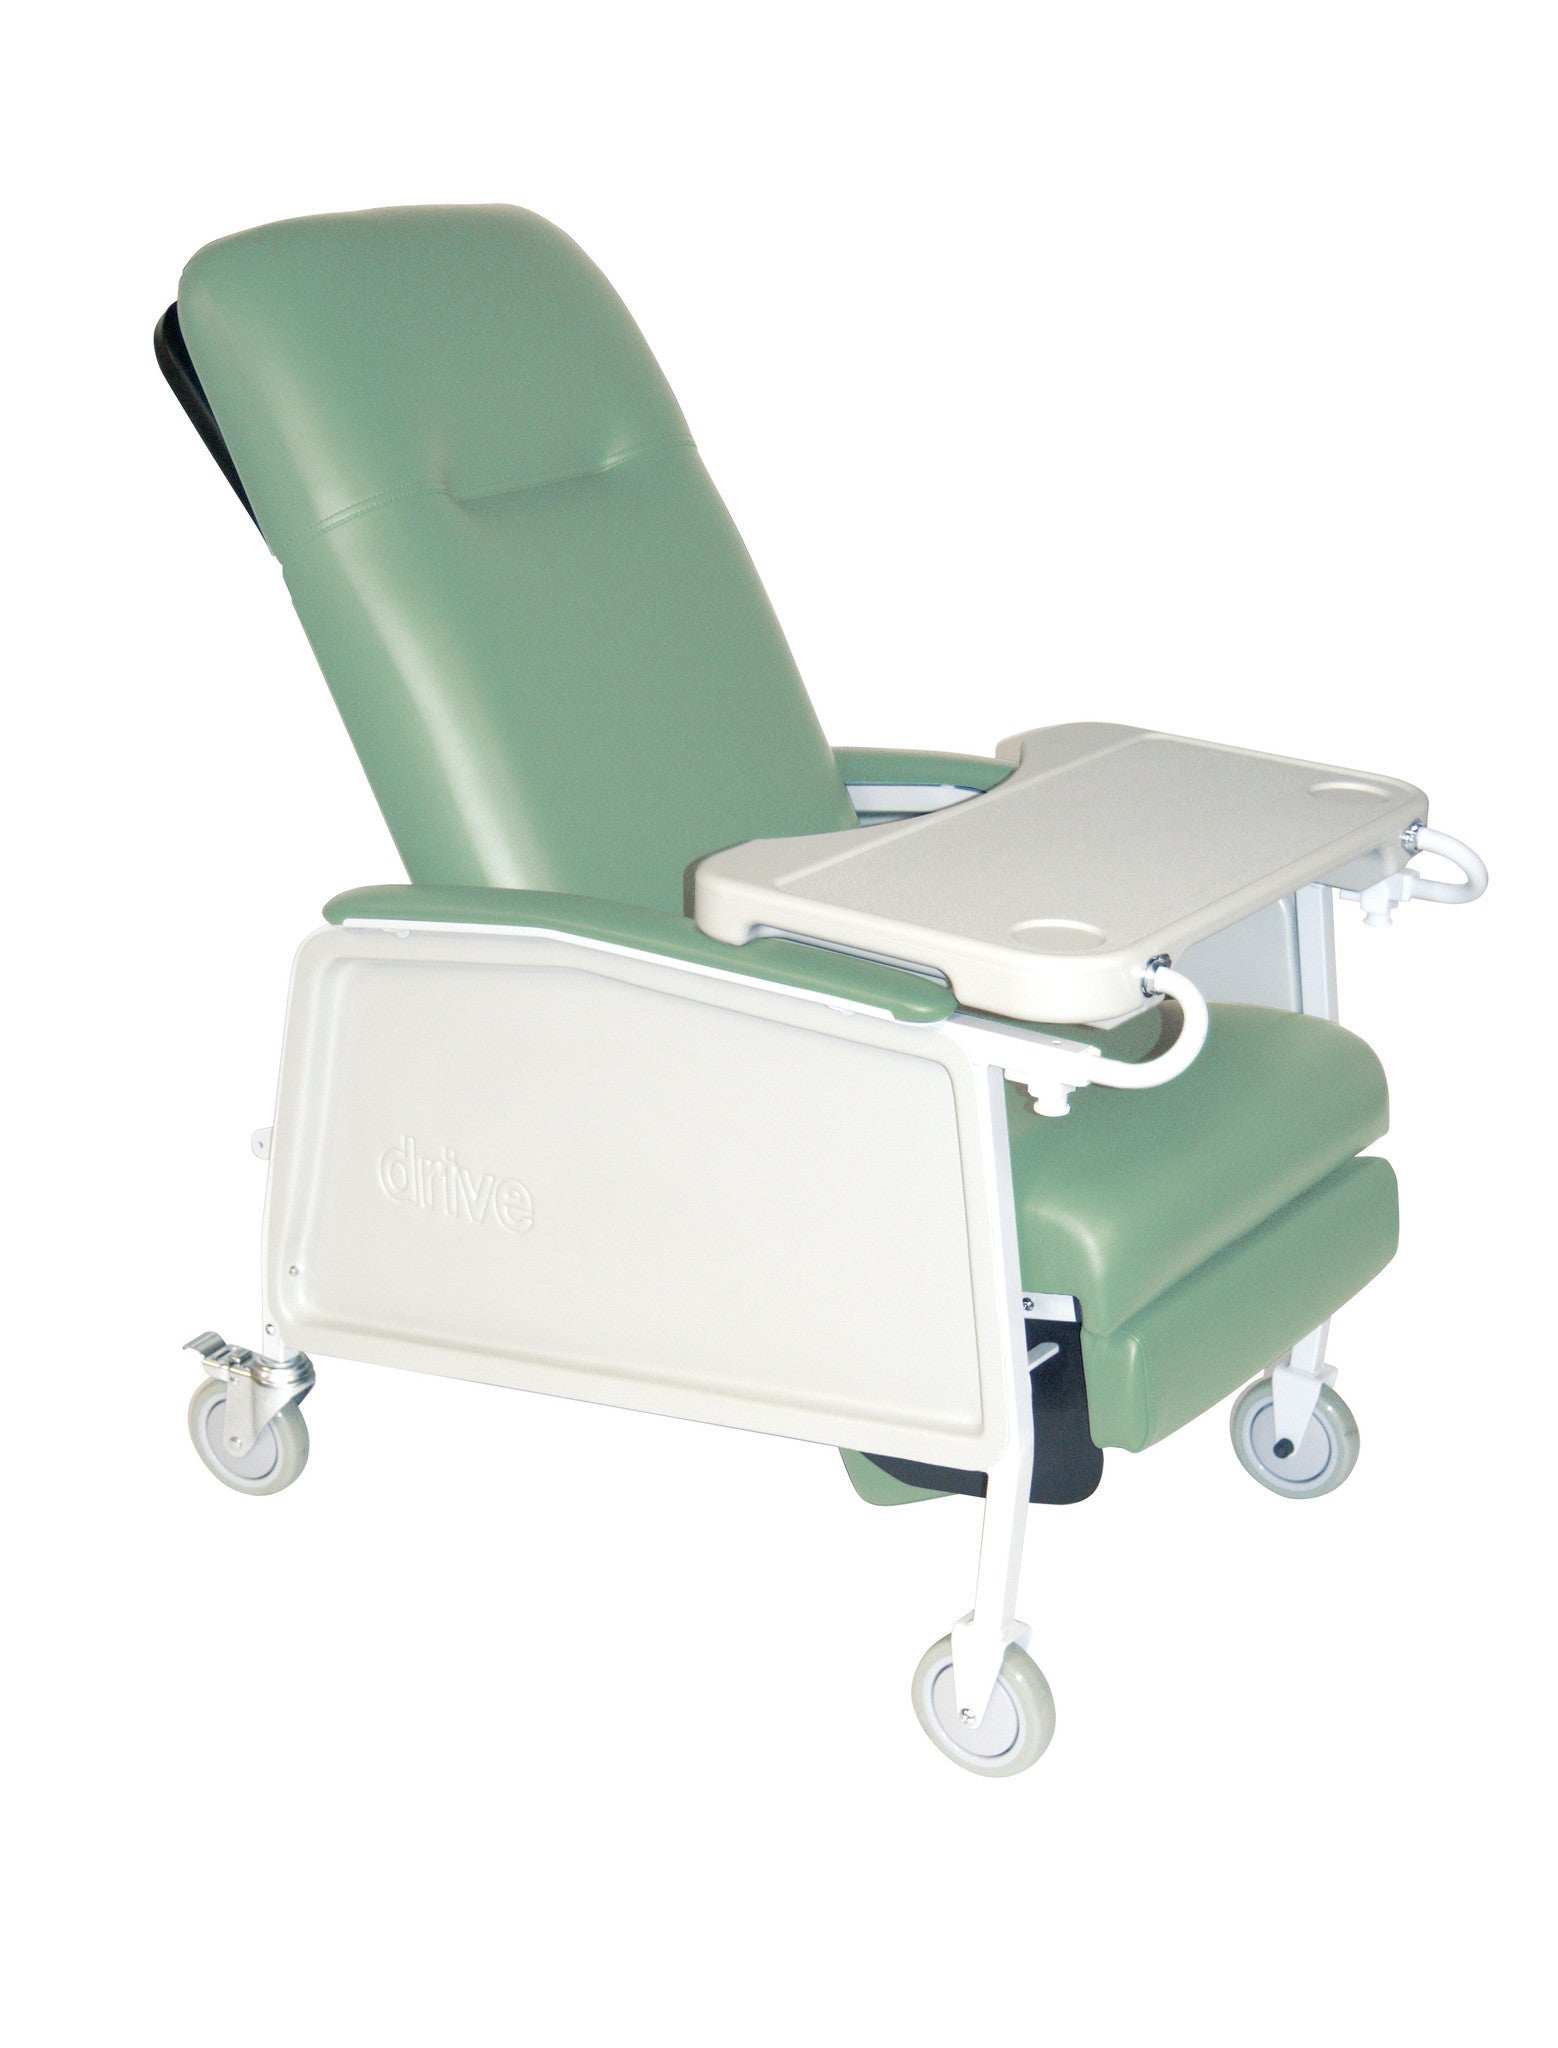 Does Medicare Cover Geri Chairs?